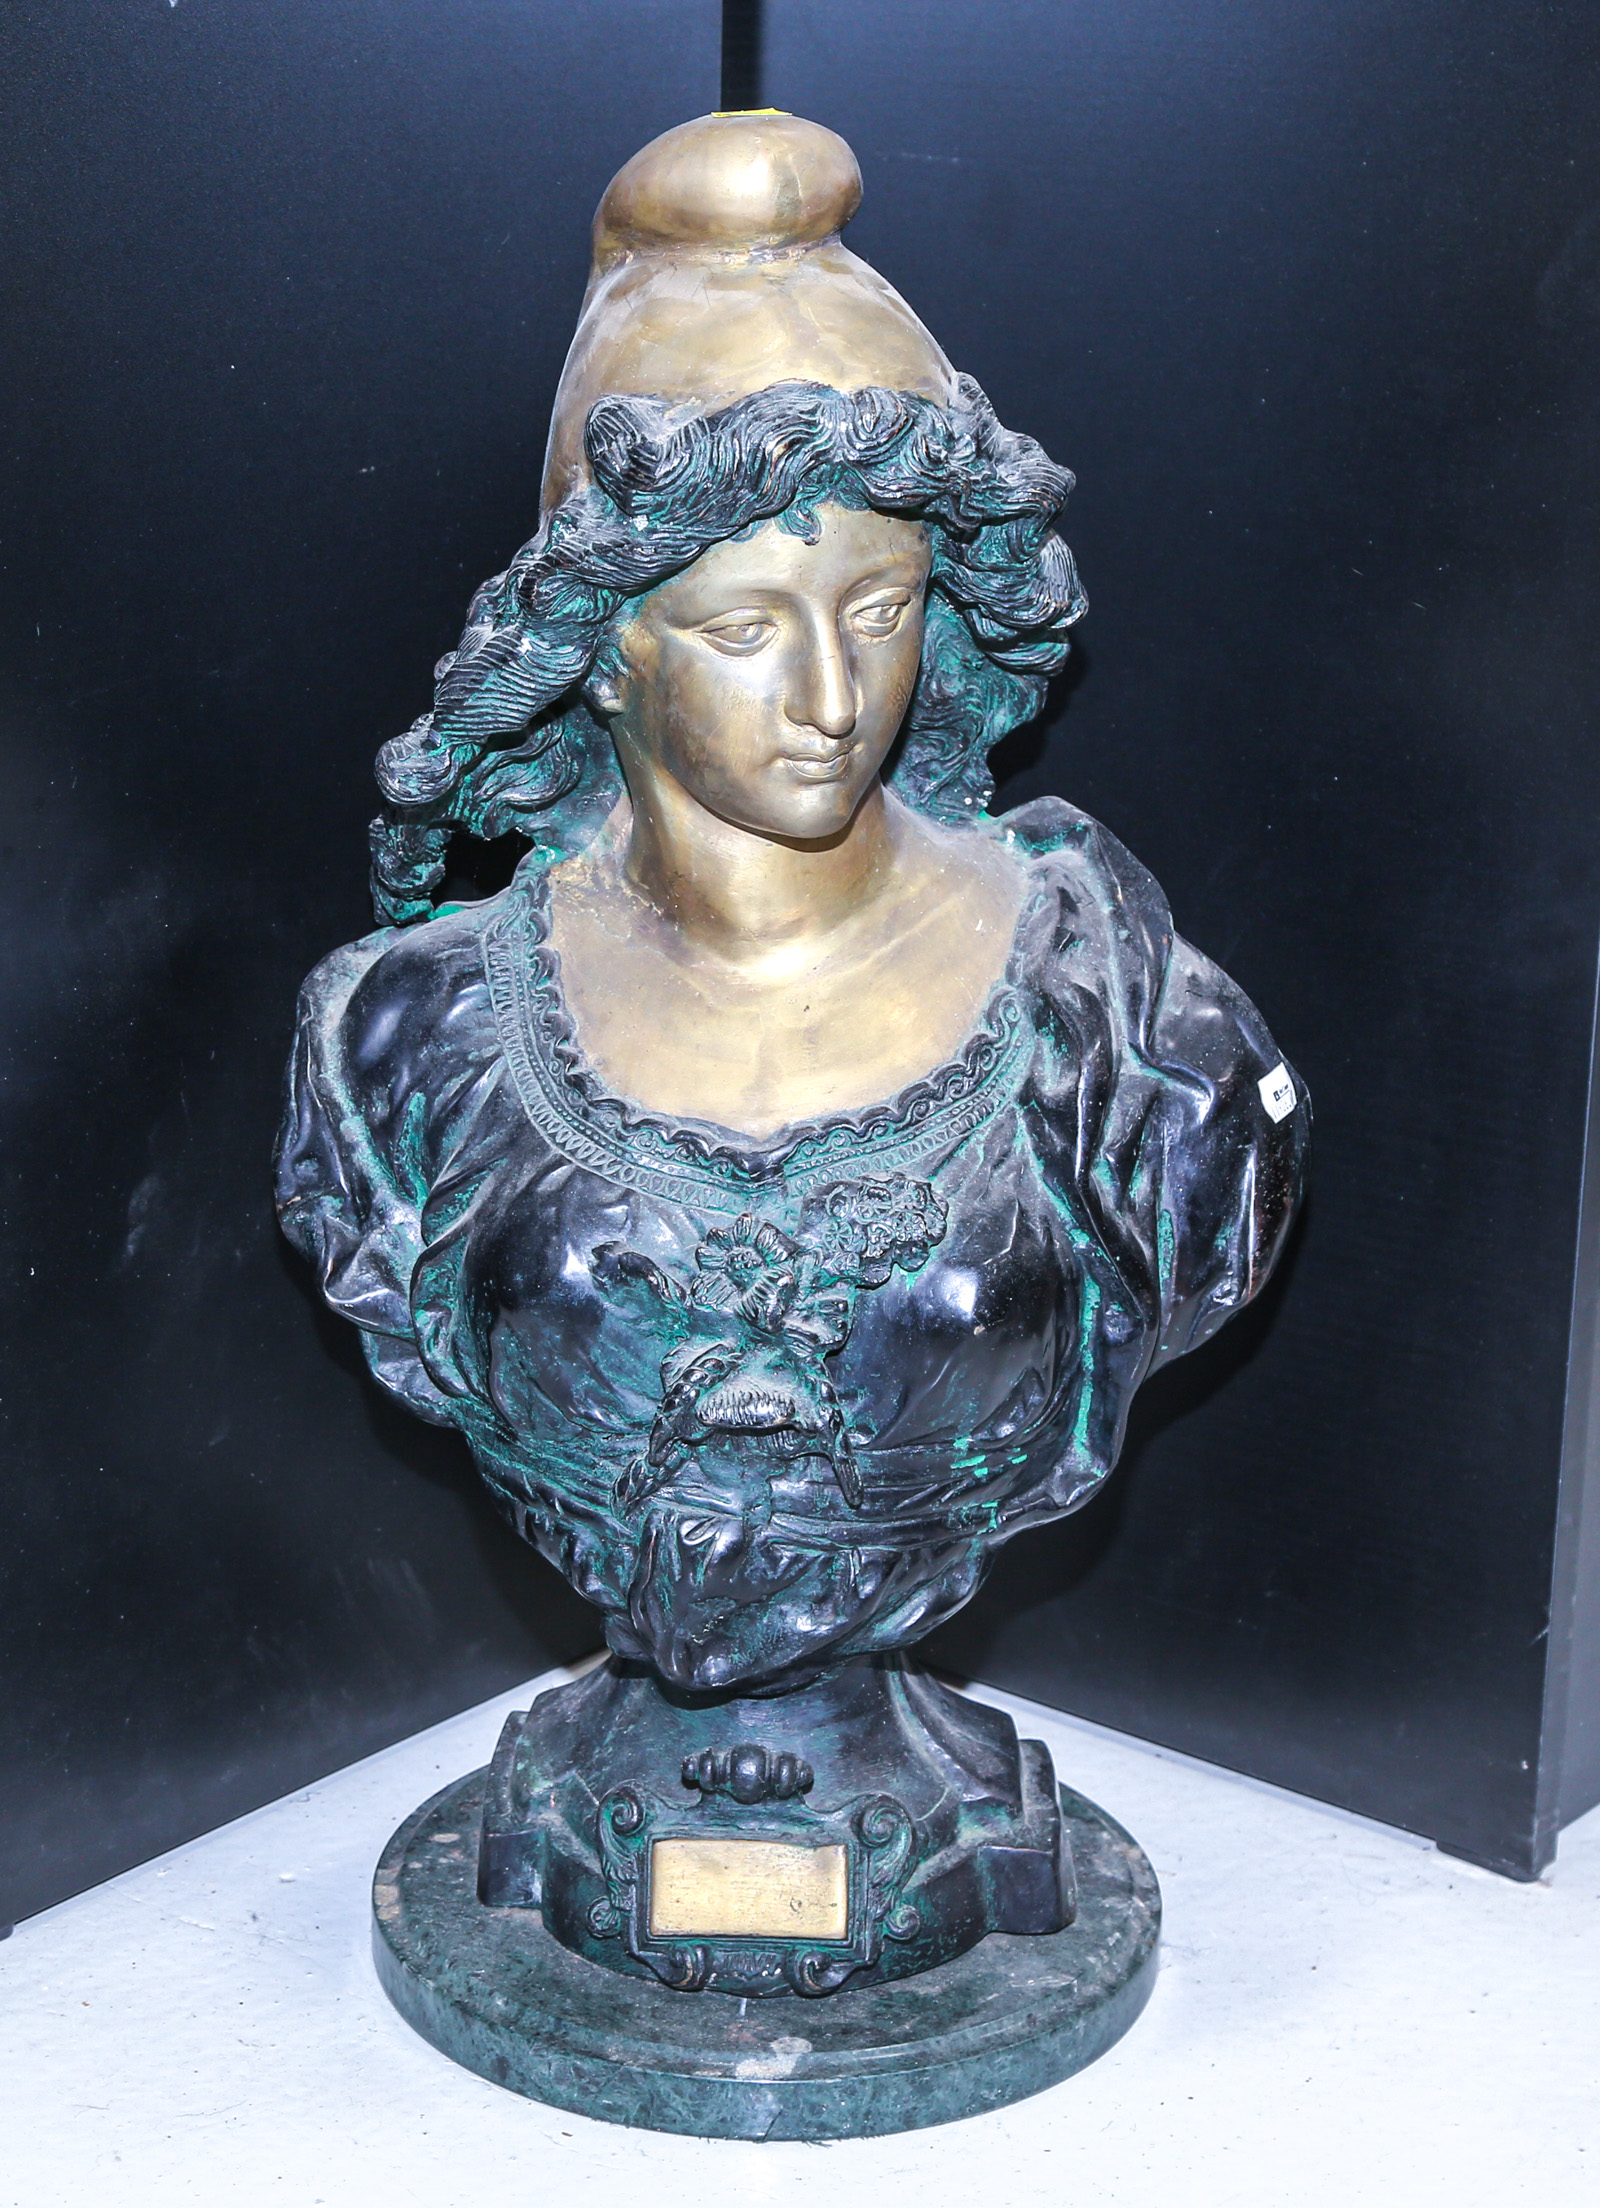 PATINATED BRONZE BUST OF A WOMAN 2e94a3